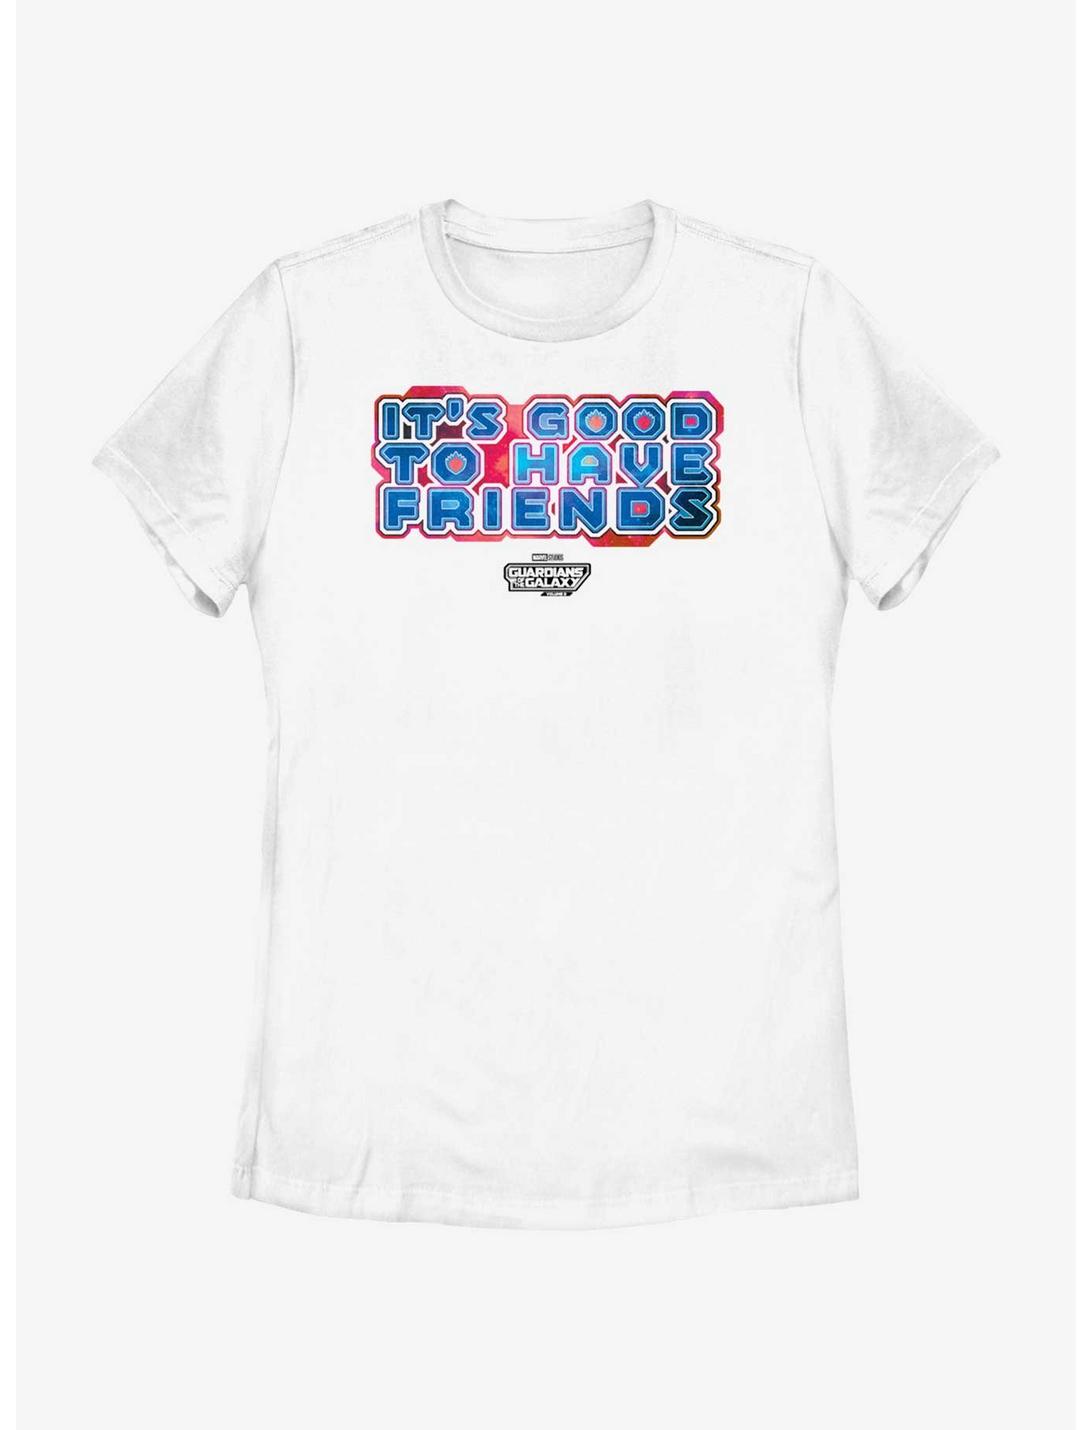 Guardians Of The Galaxy Vol. 3 Good To Have Friends Womens T-Shirt, WHITE, hi-res